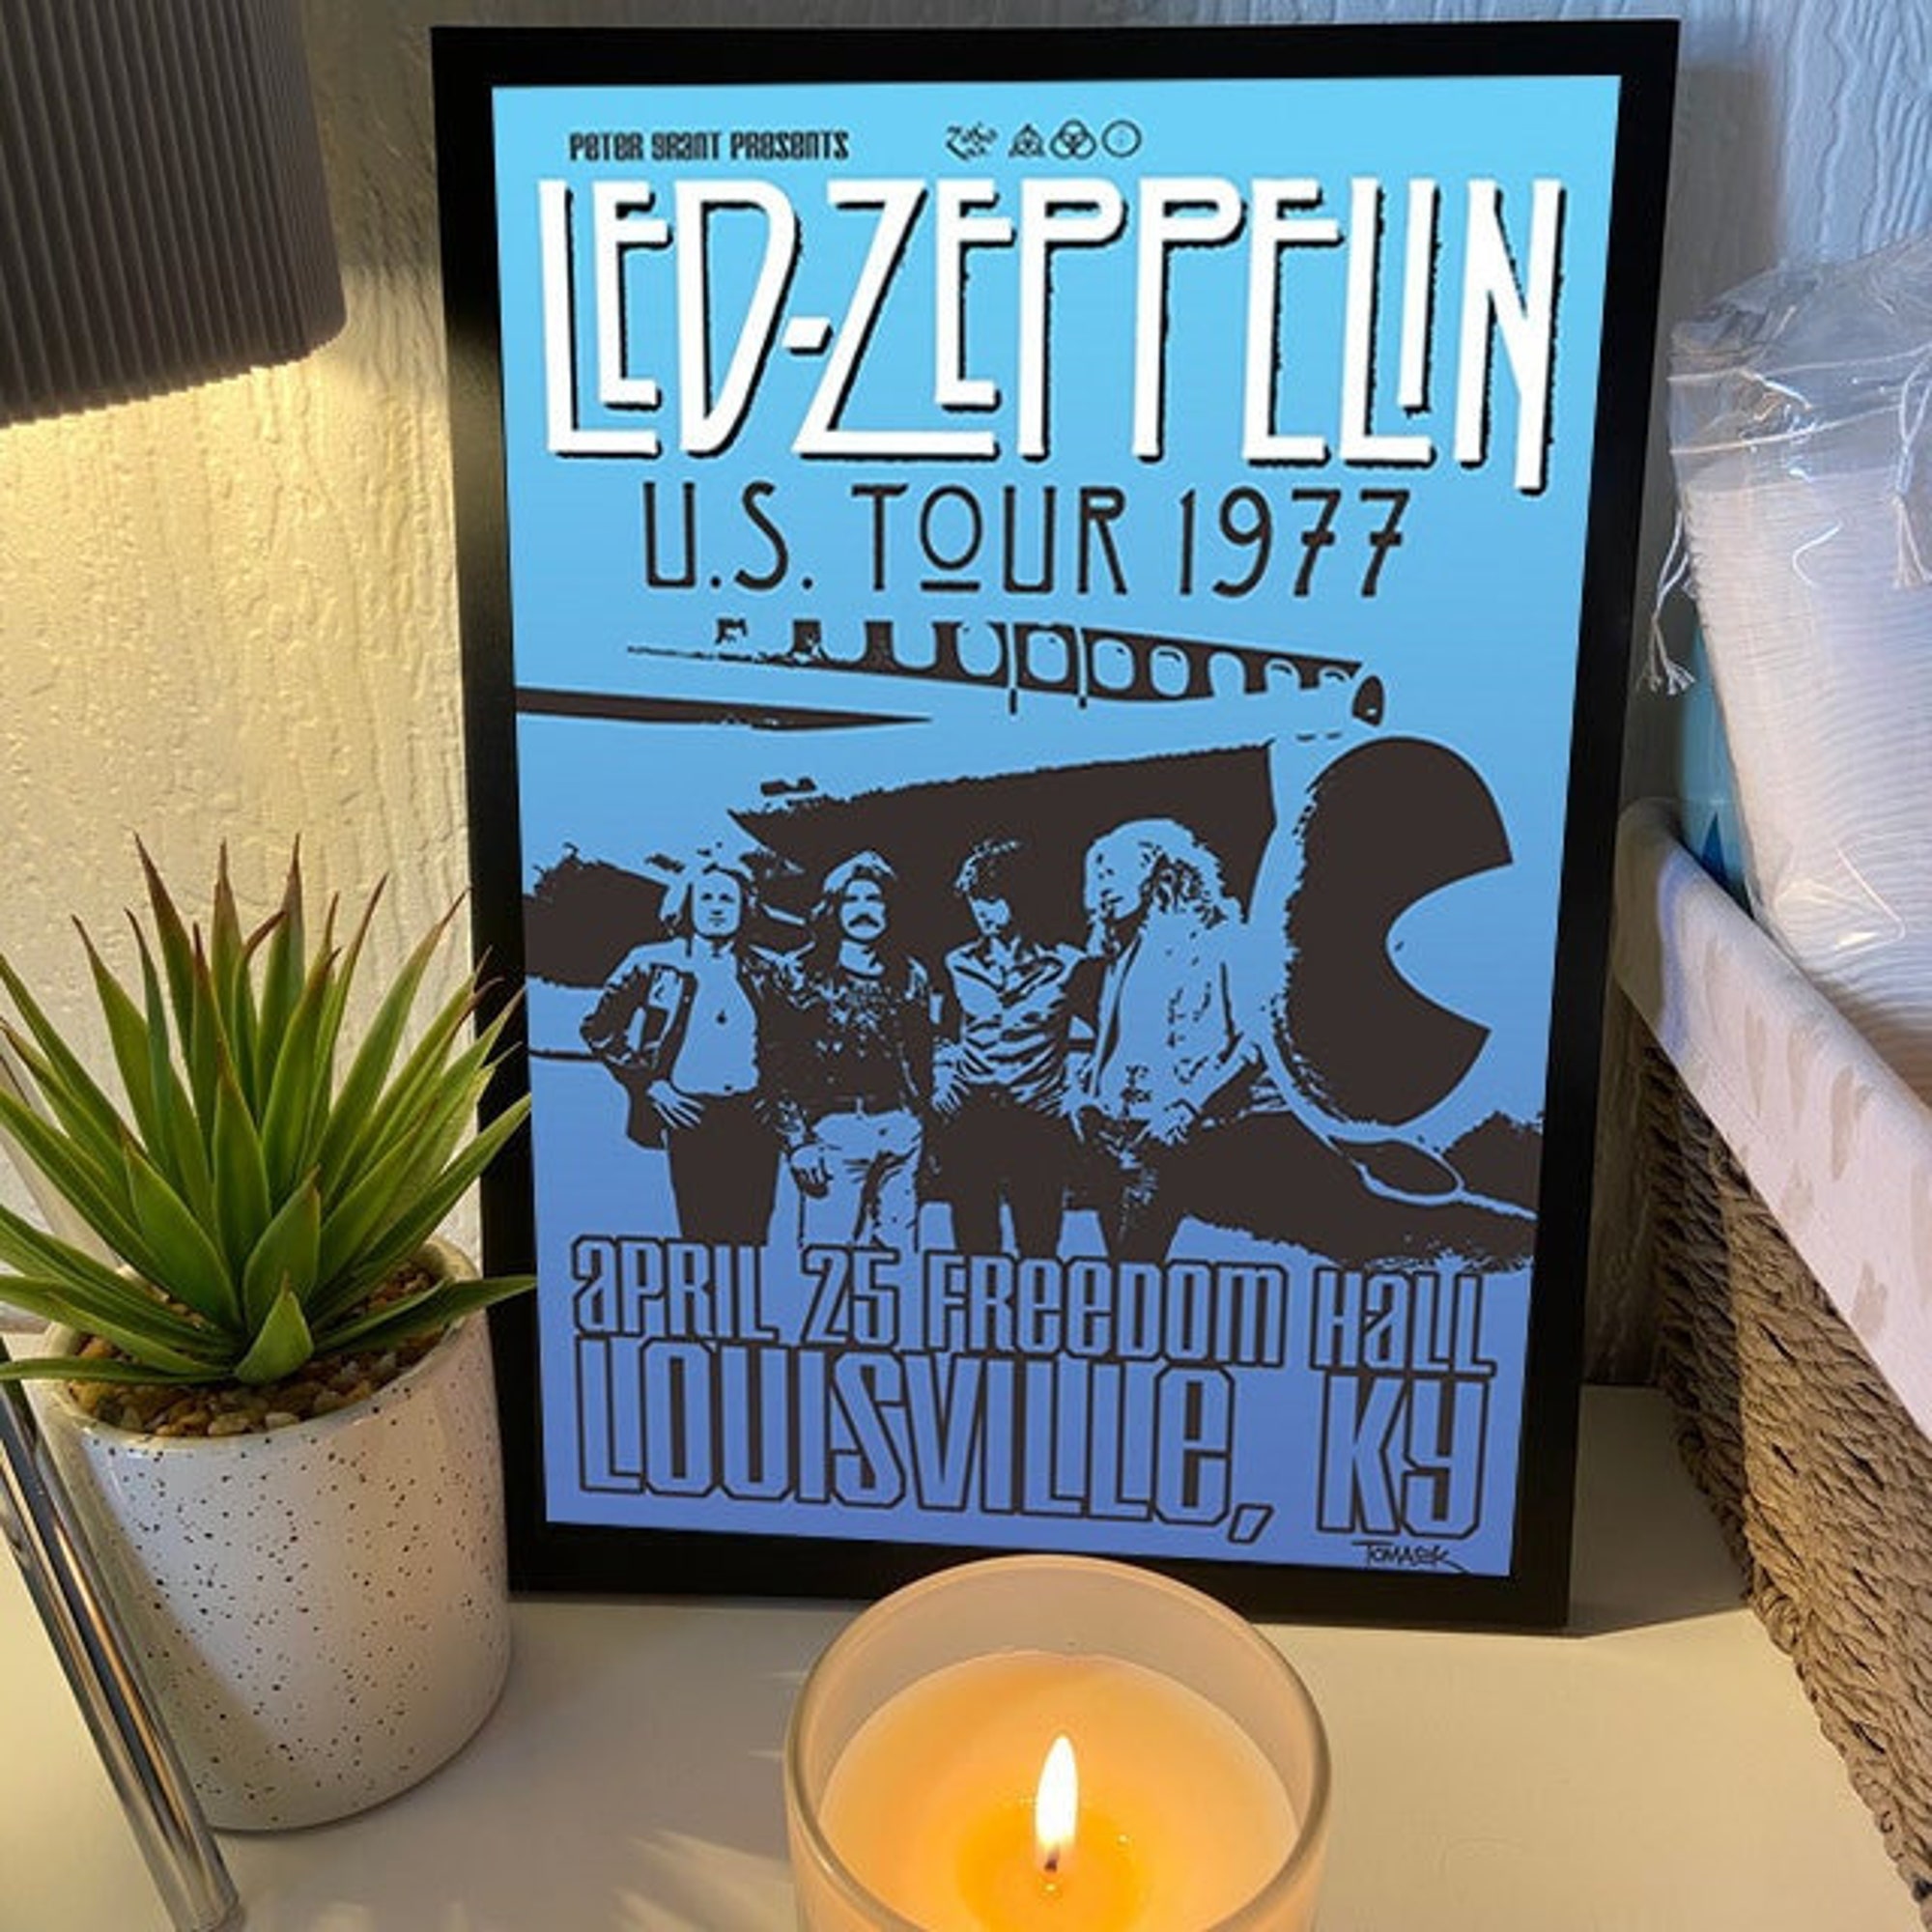 LED ZPELIN Concert Posters